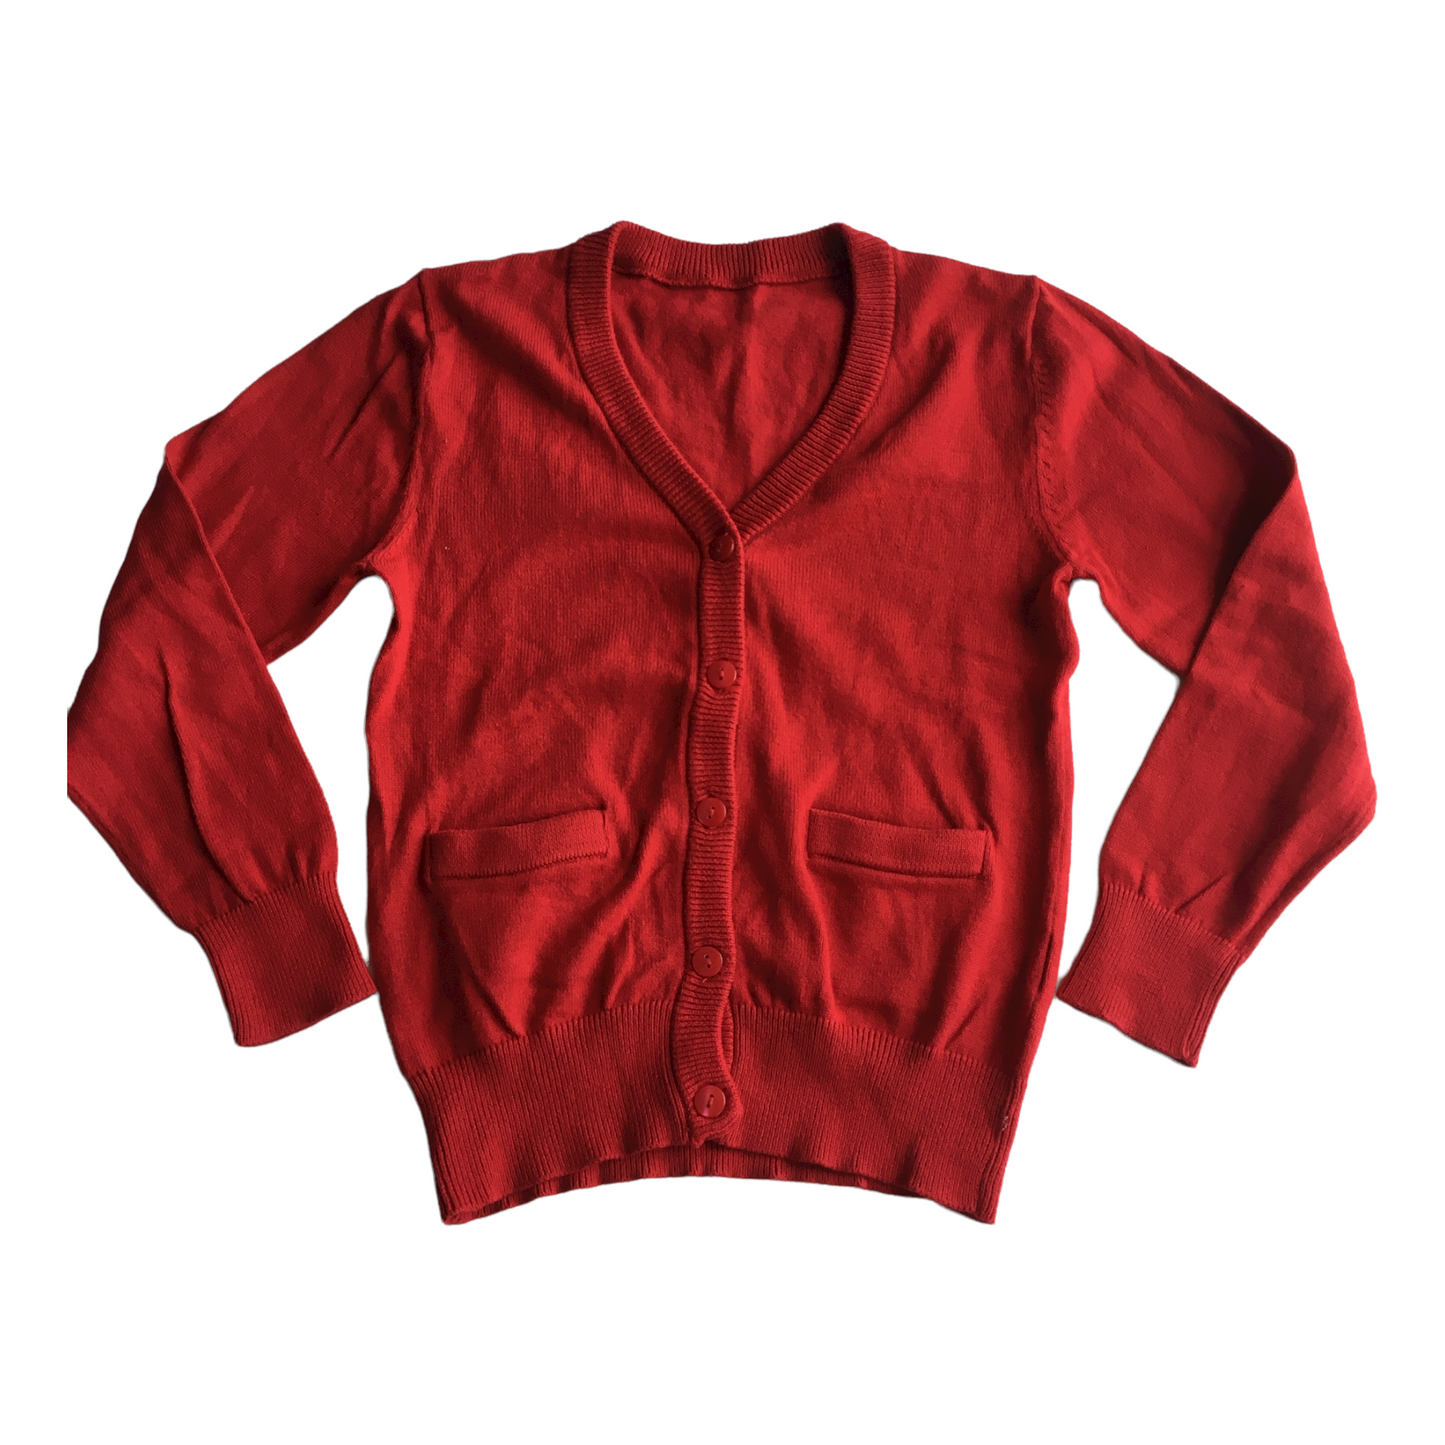 Red School Cardigan with Pockets